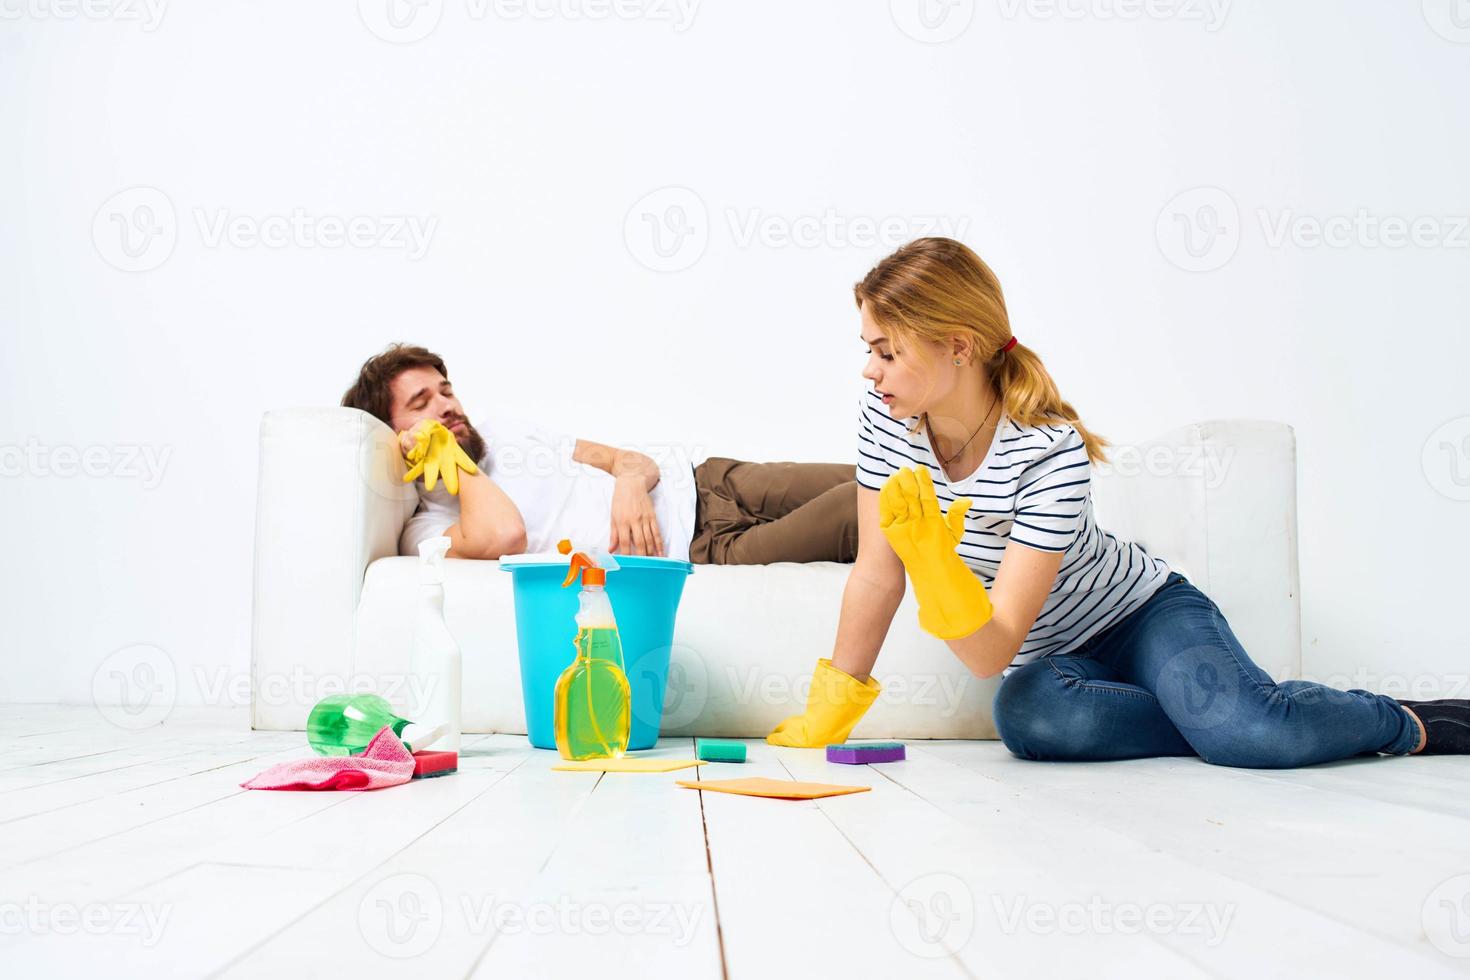 young couple at home near sofa washing supplies cleaning lifestyle photo